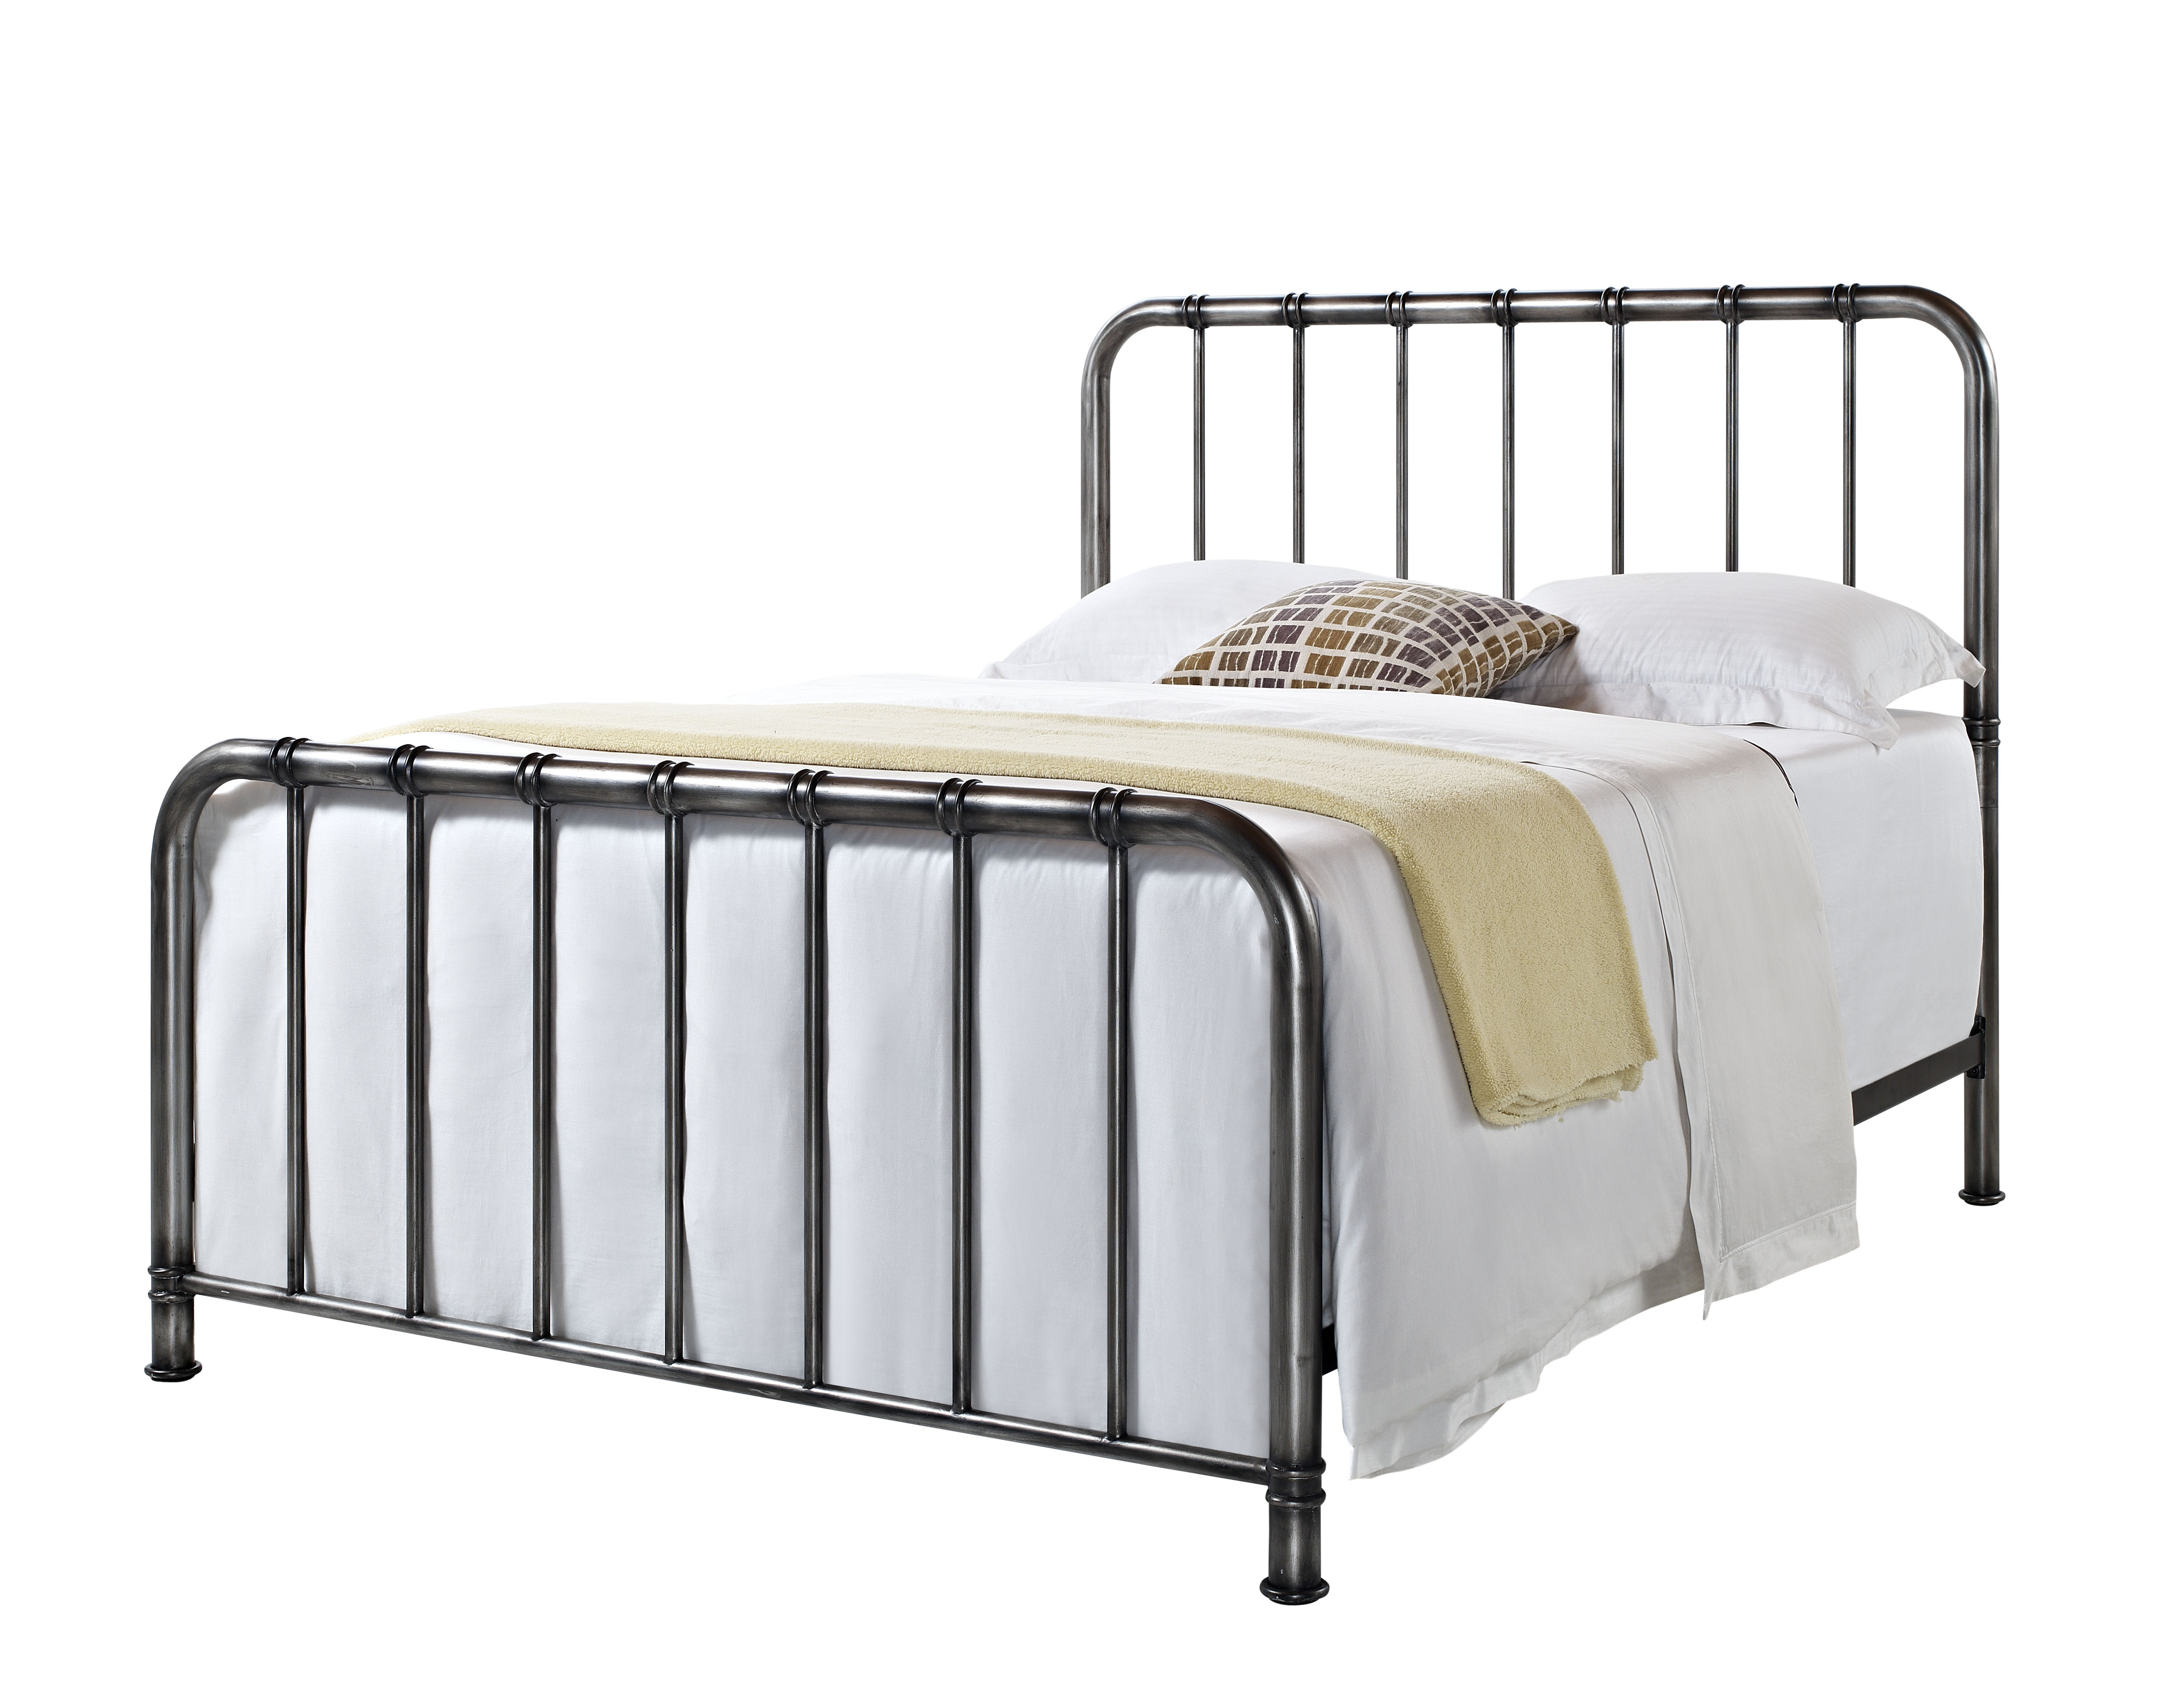 Standard Furniture Tristen King Metal Bed In Antique Pewter 87500 87531 intended for sizing 4805 X 3775